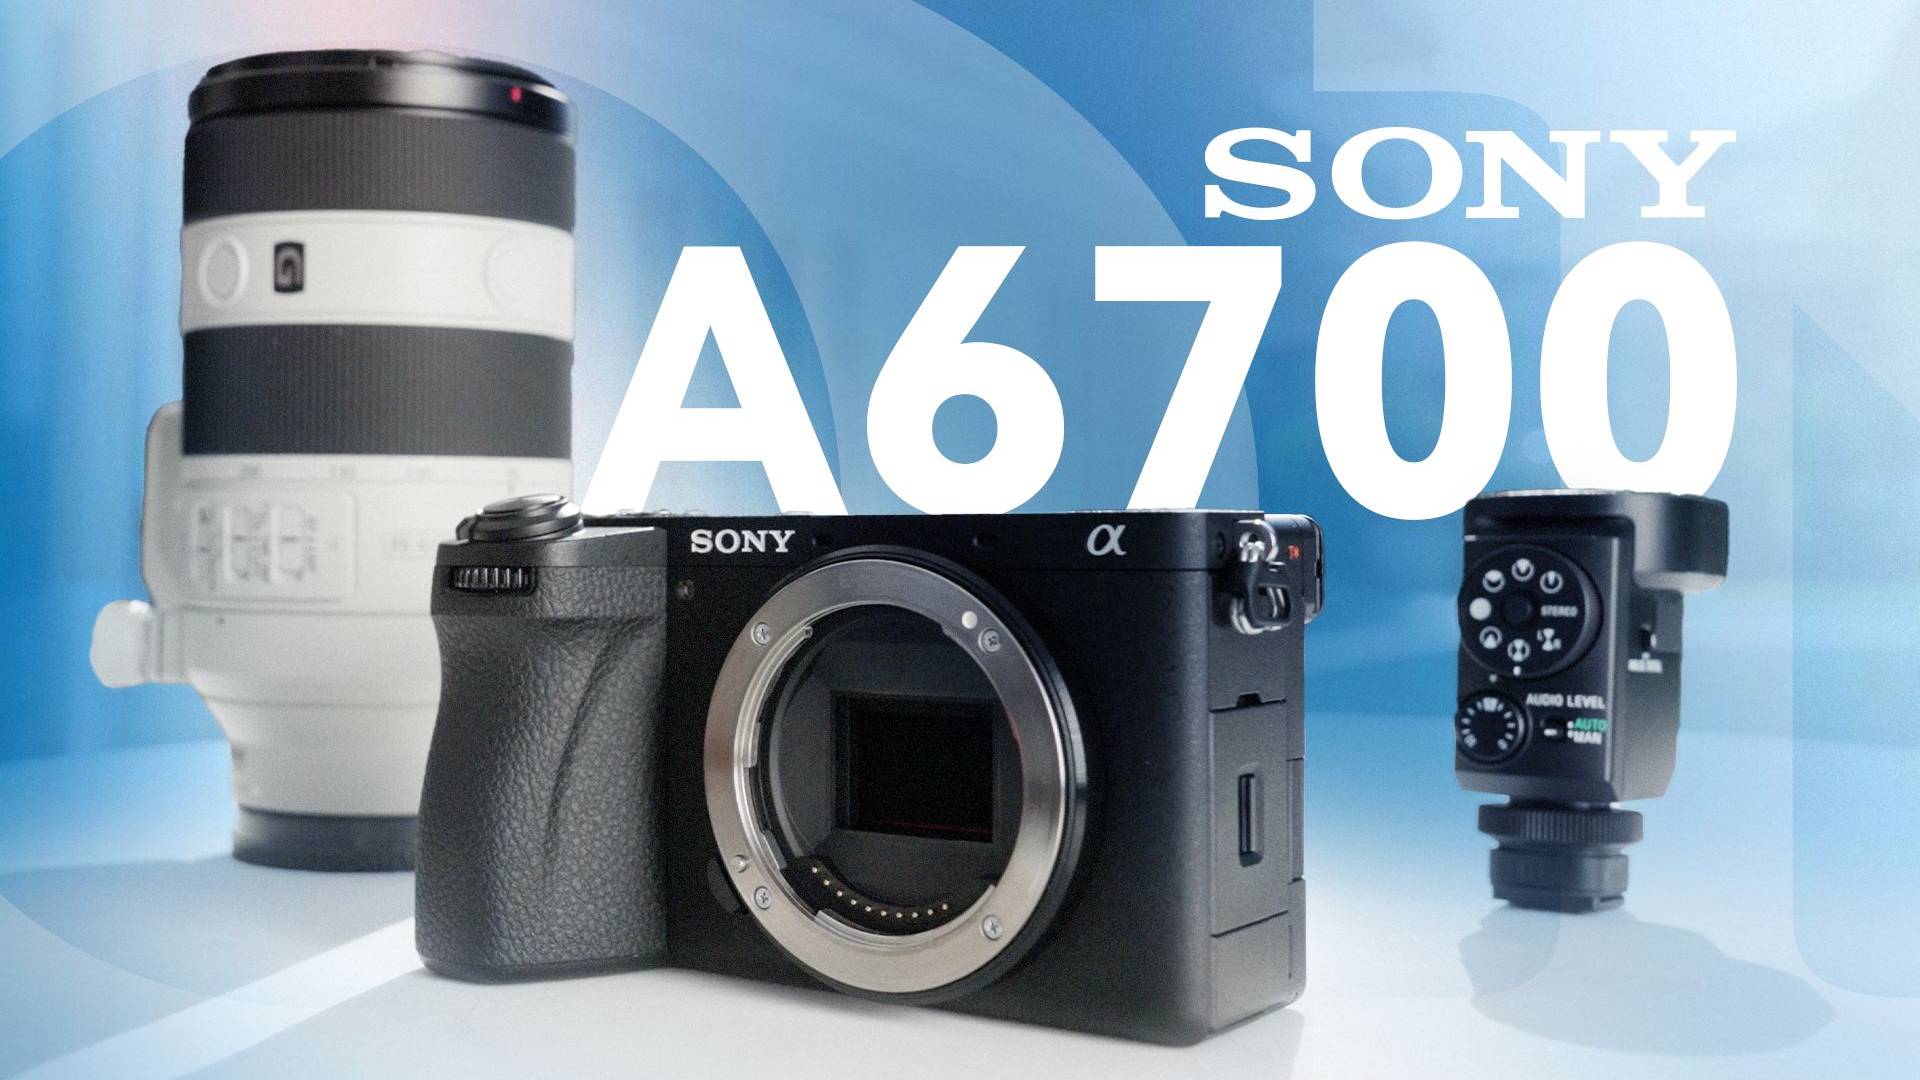 How to Choose the Best Viltrox Lens for Your Sony A6700 Camera